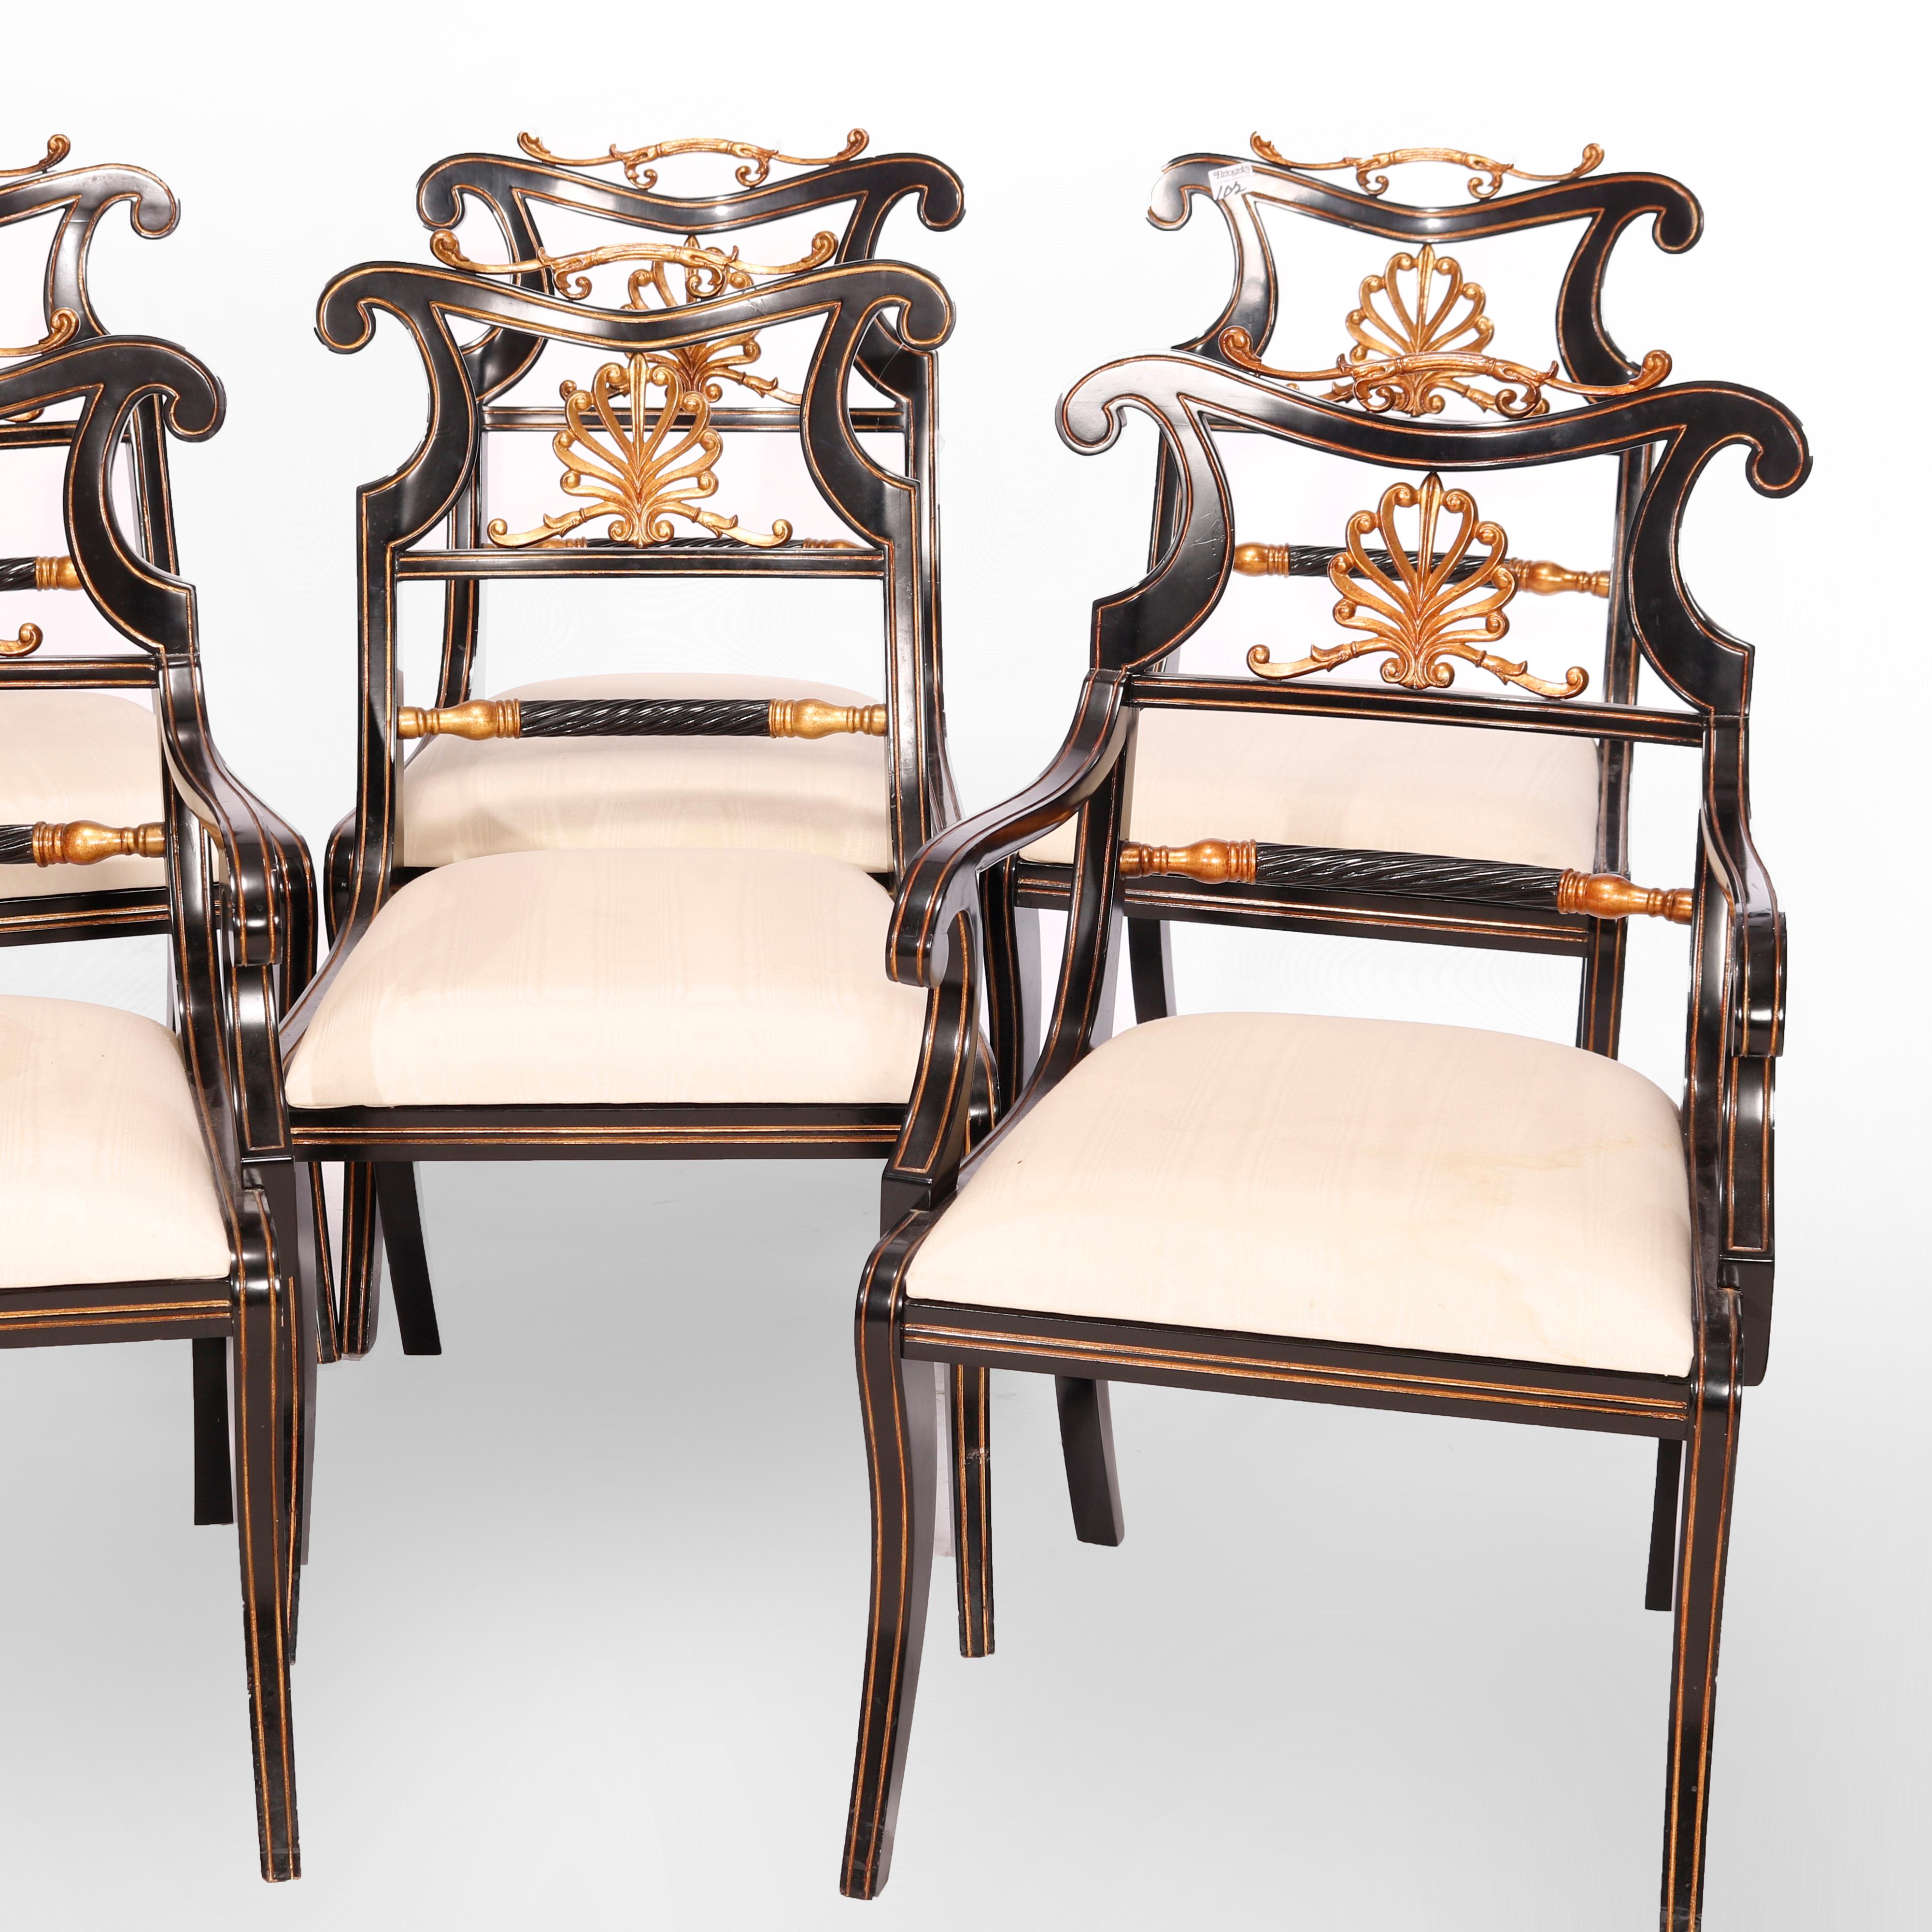 Six Maitland Smith French Empire Style Ebonized & Giltwood Dining Chairs 20th C 6